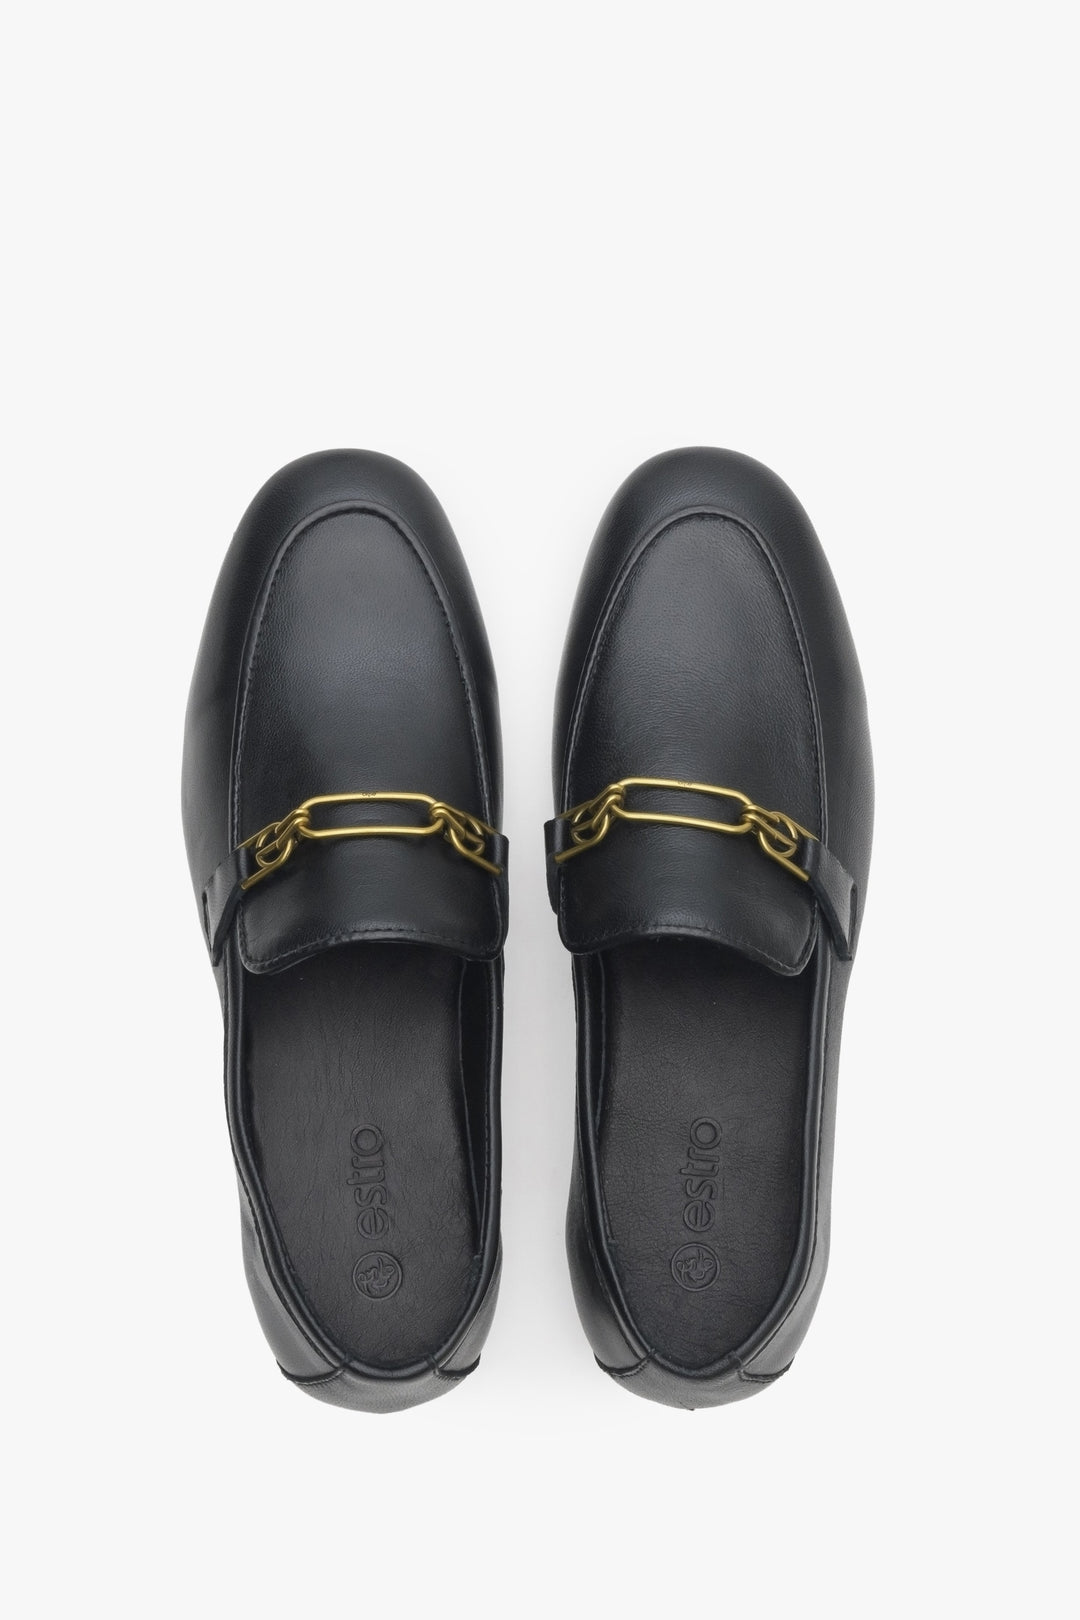 Women's black leather penny loafers Estro - presentation from above.